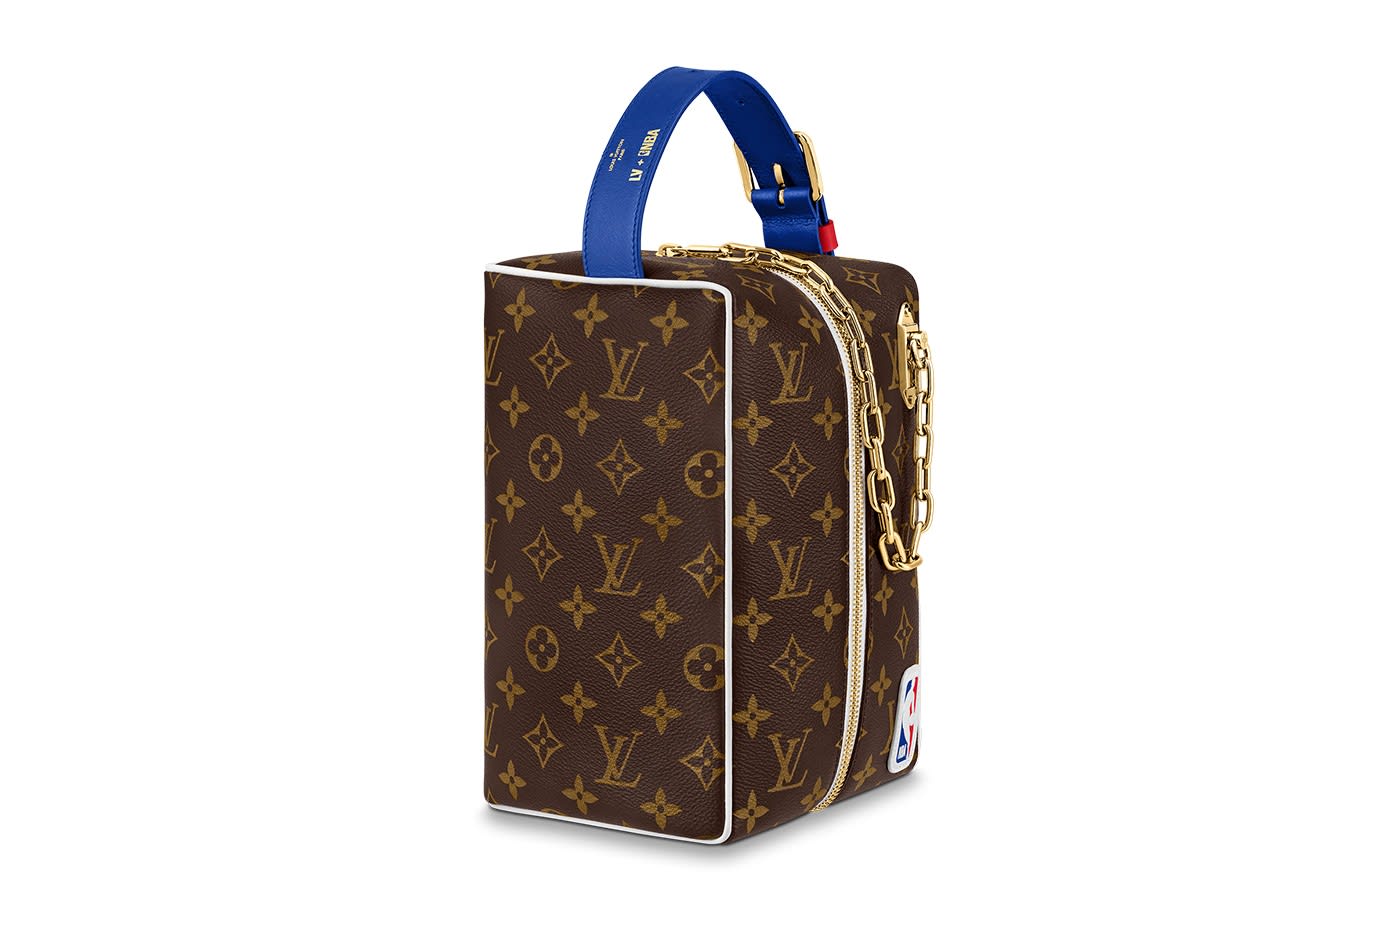 EXCLUSIVE: First Look at the Louis Vuitton x NBA Capsule Line – WWD